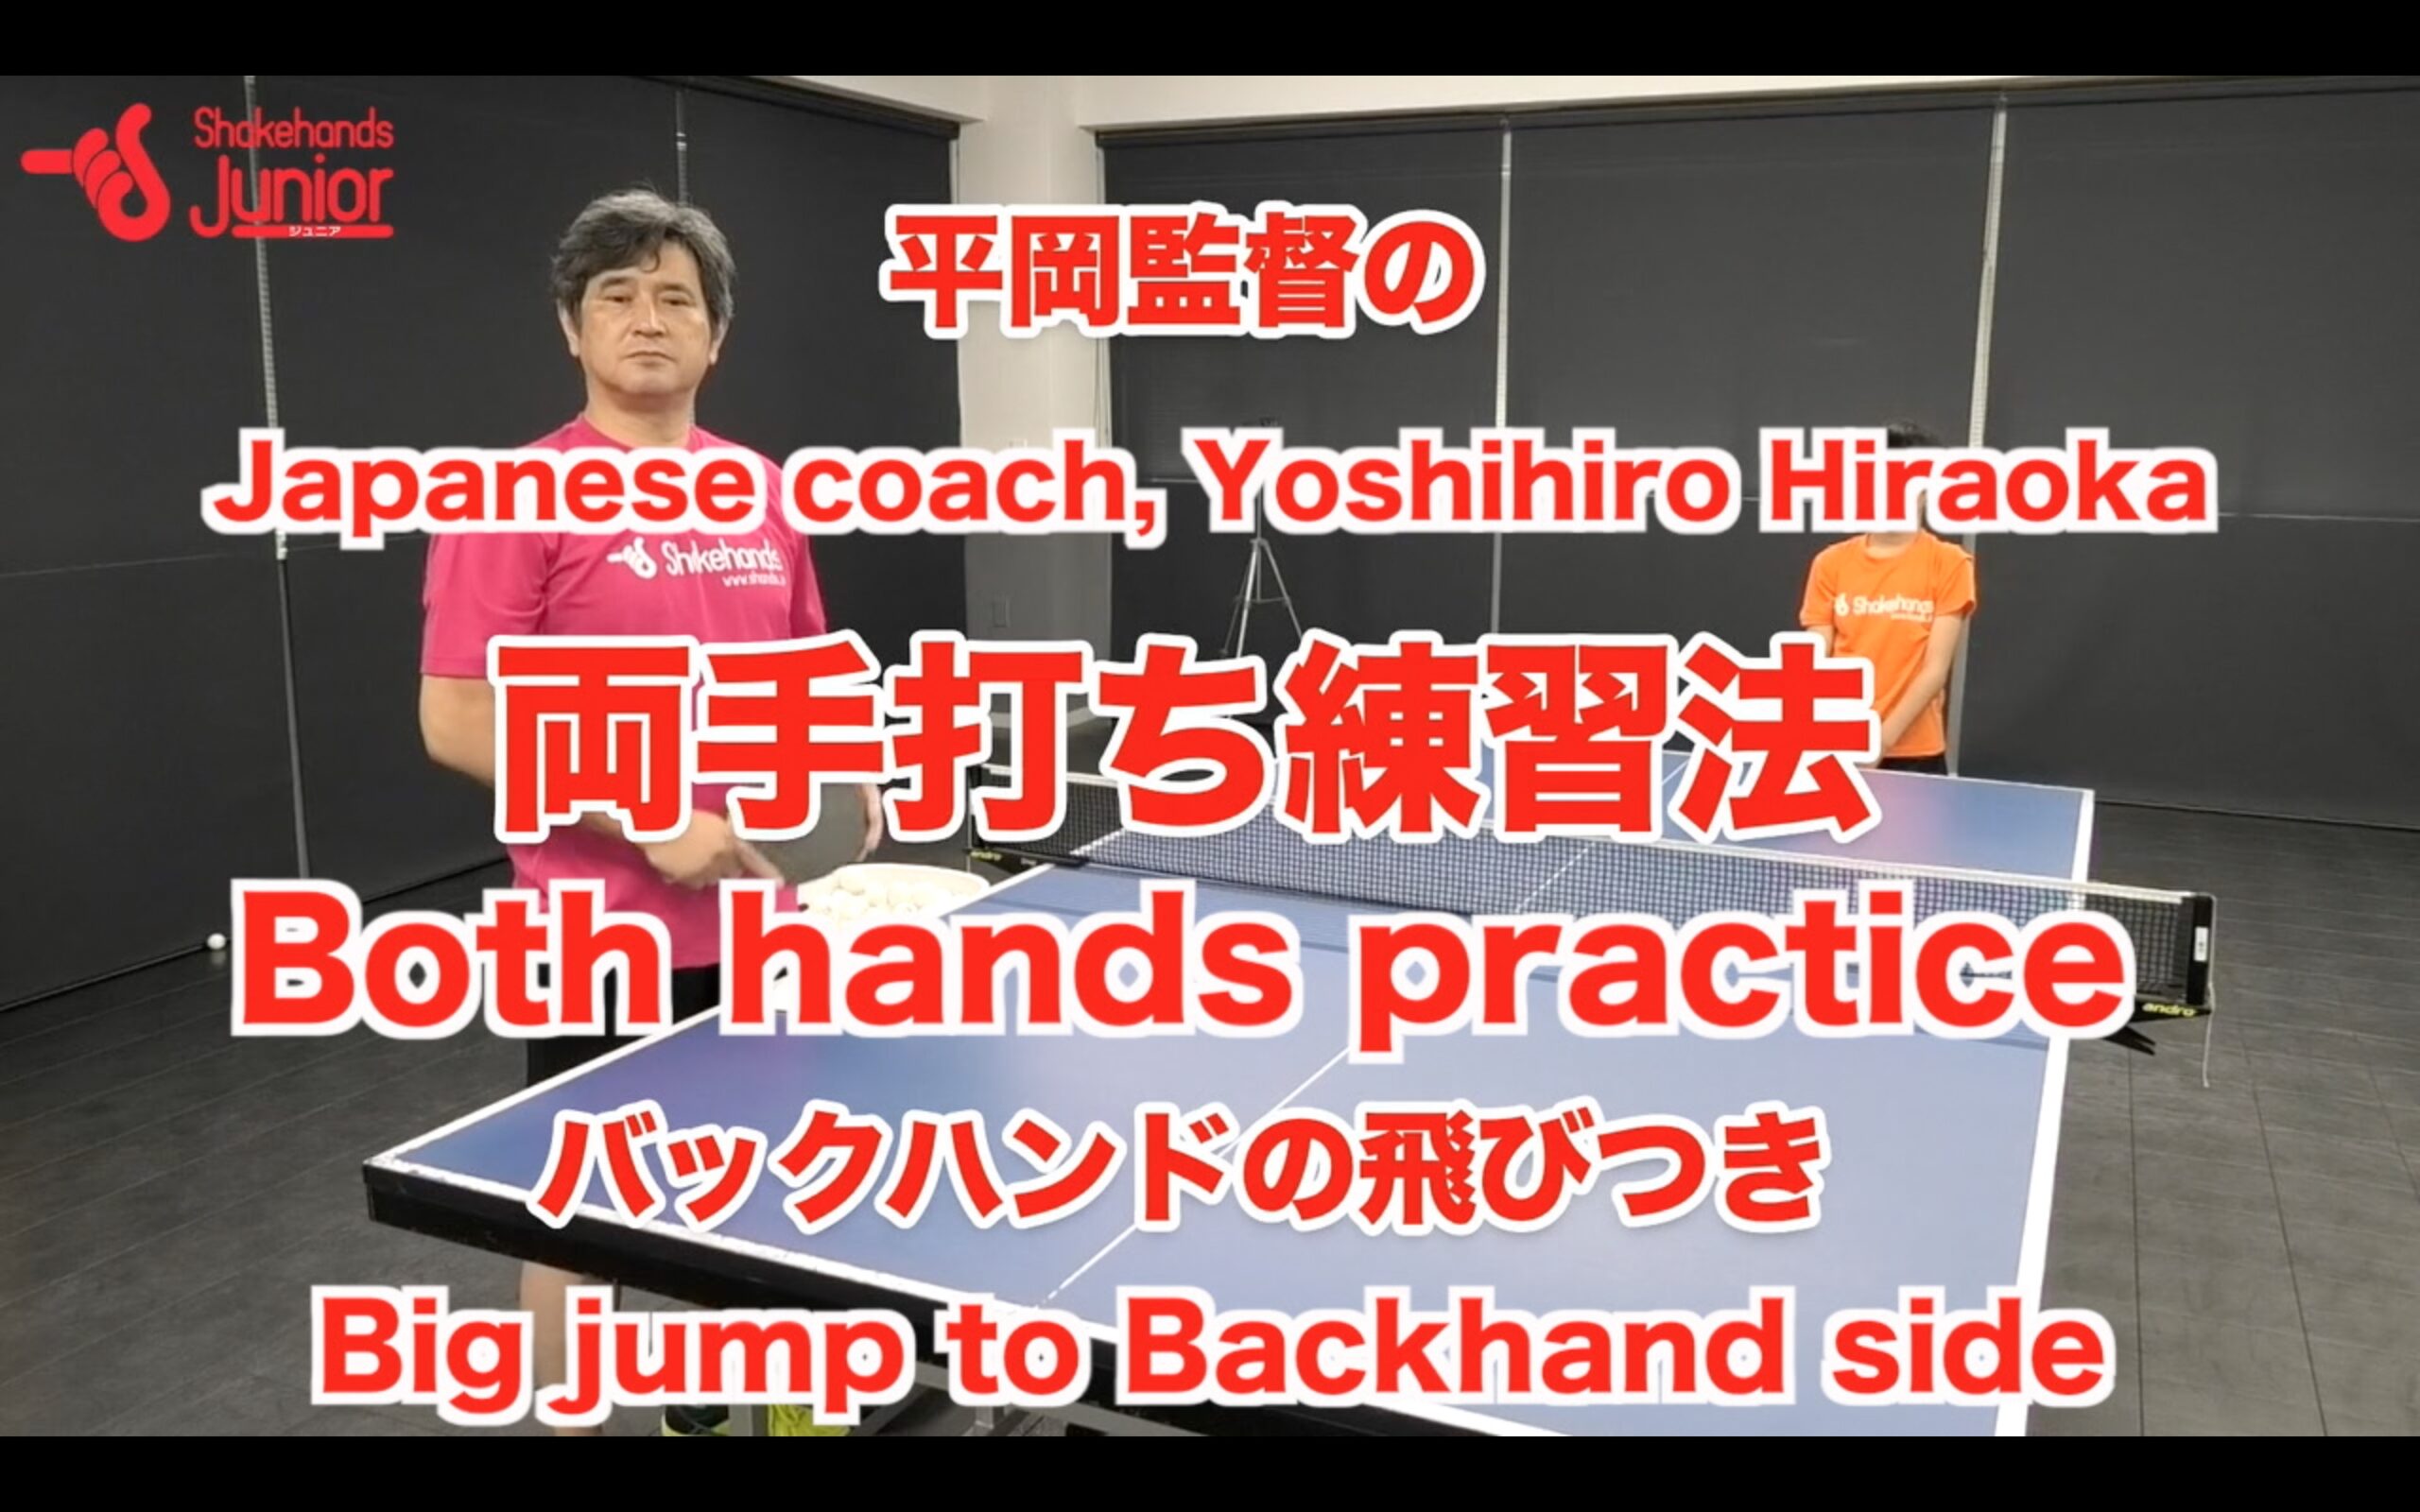 Both hands practice Big jump to BH side